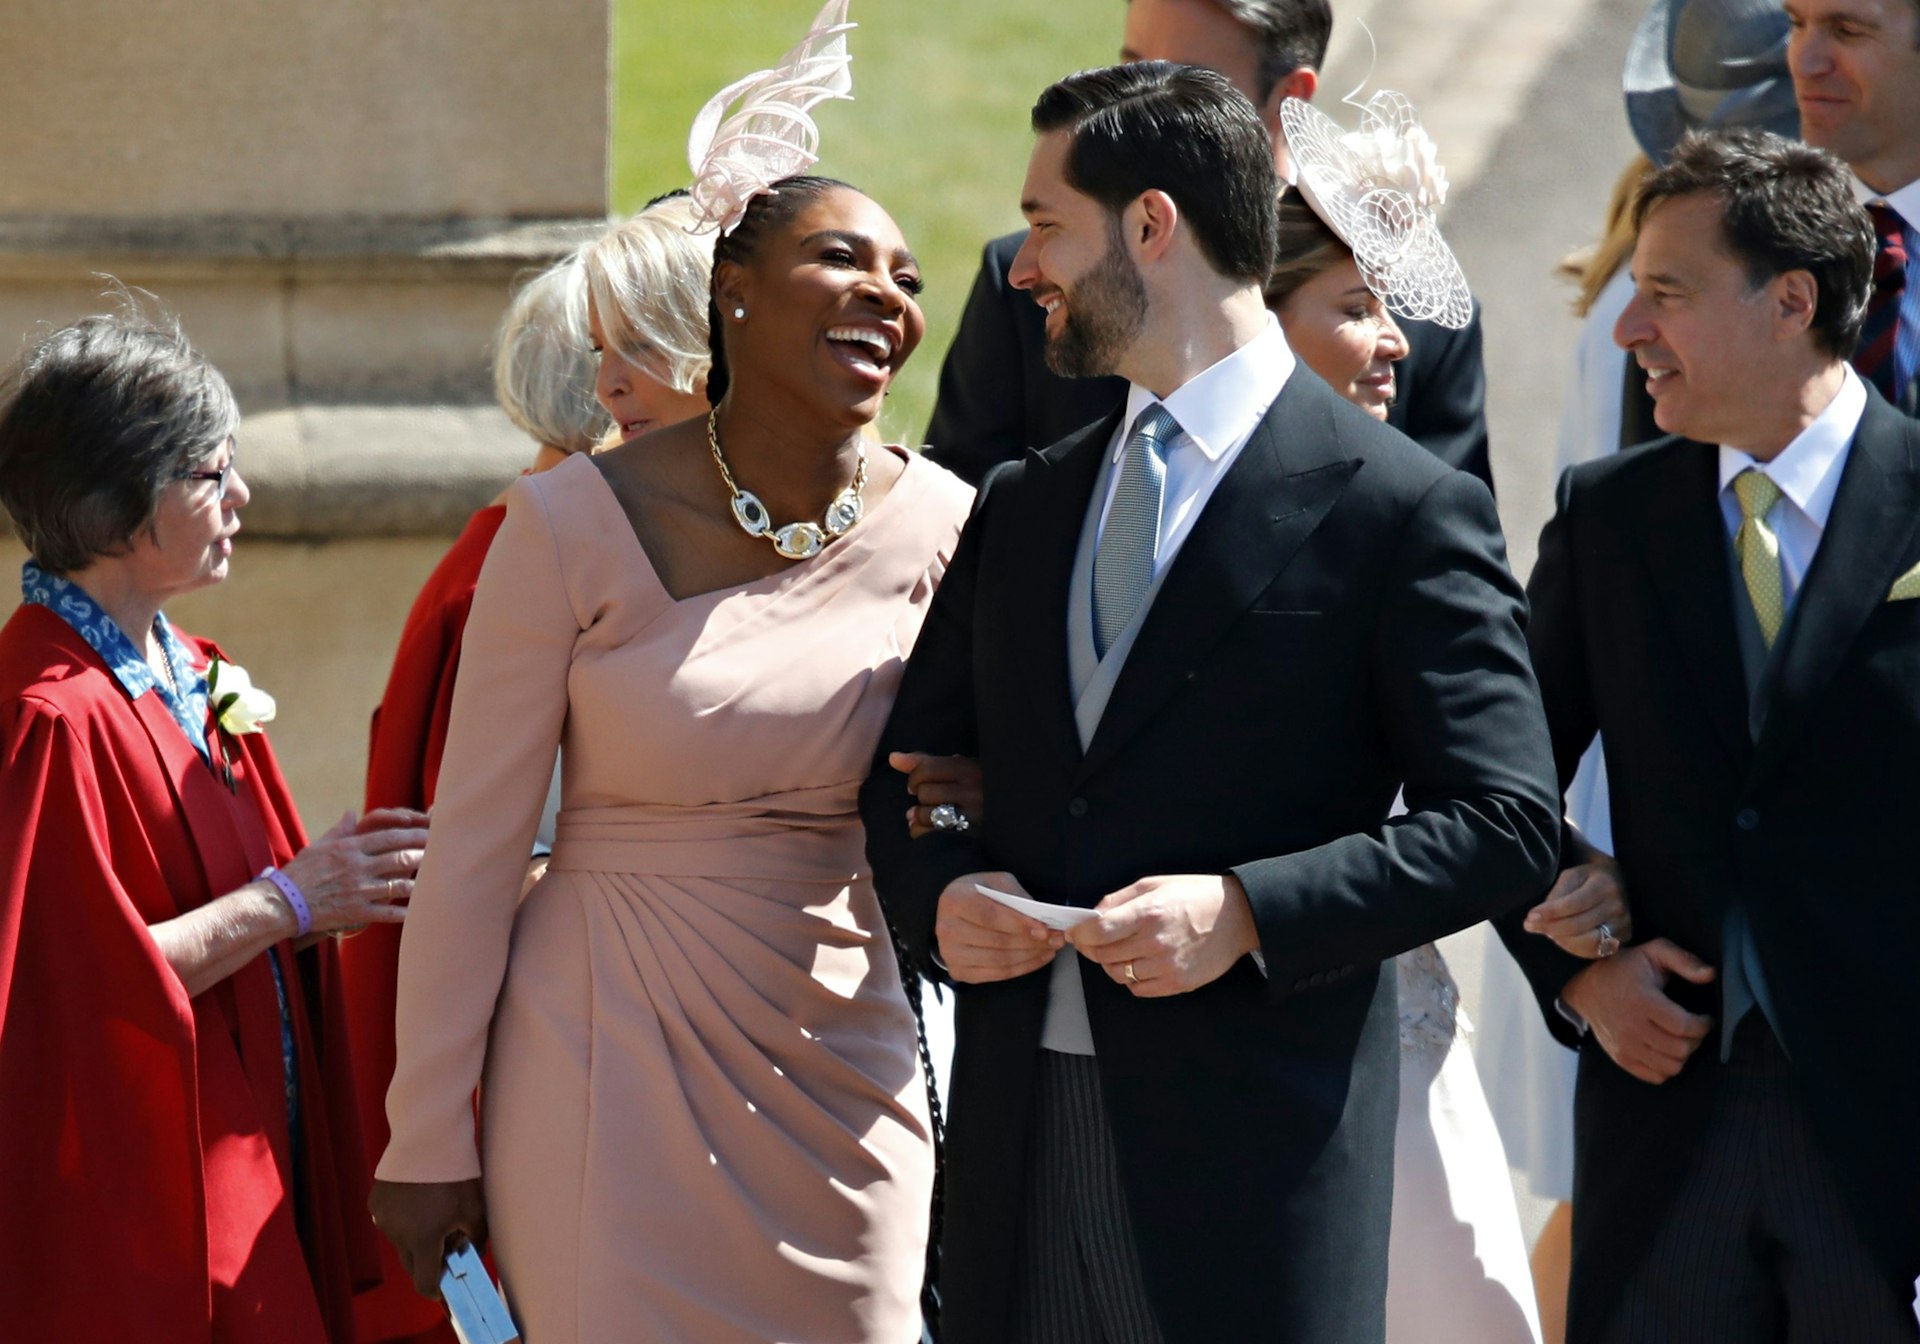 Serena Williams and her husband Alexis Ohanian are pictured smiling at the wedding of Prince Harry and Meghan Markle.